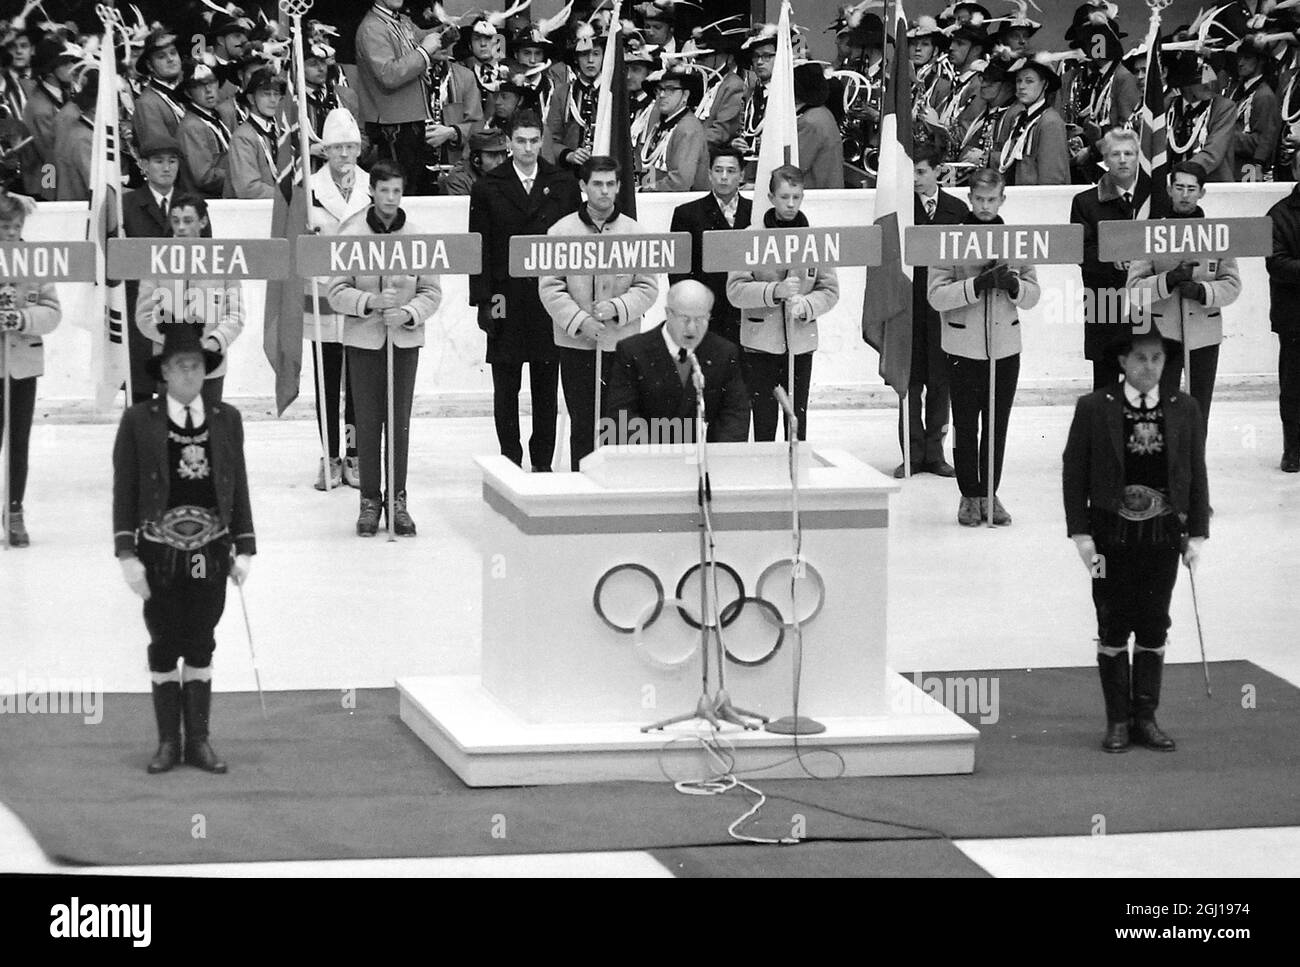 10 FEBRUARY 1964 AVERY BRUNDAGE, PRESIDENT OF THE IOC, ANNOUNCES THE END OF THE WINTER OLYMPICS GAMES DURING THE CLOSING CEREMONY IN INNSBRUCK, AUSTRIA Stock Photo